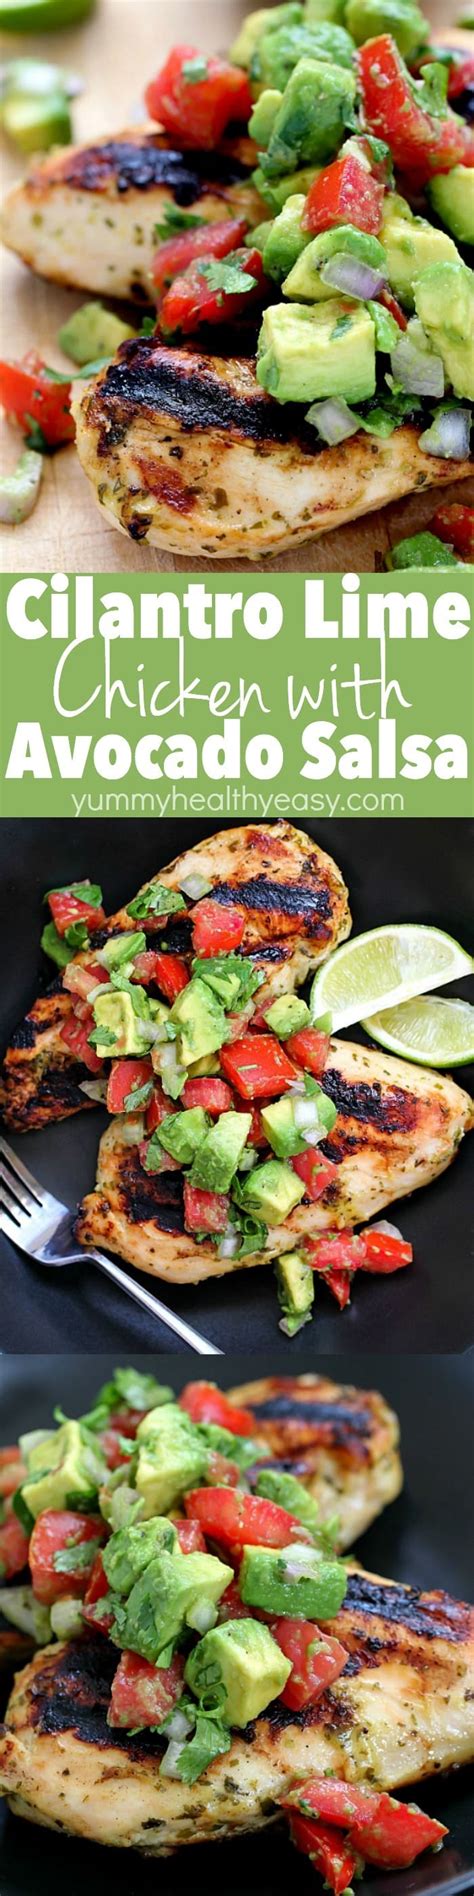 While the chicken cooks, make the avocado topping by combining the diced avocadoes with the shallots, cilantro, lime juice, and salt in a medium bowl. Cilantro Lime Chicken with Avocado Salsa - Yummy Healthy Easy